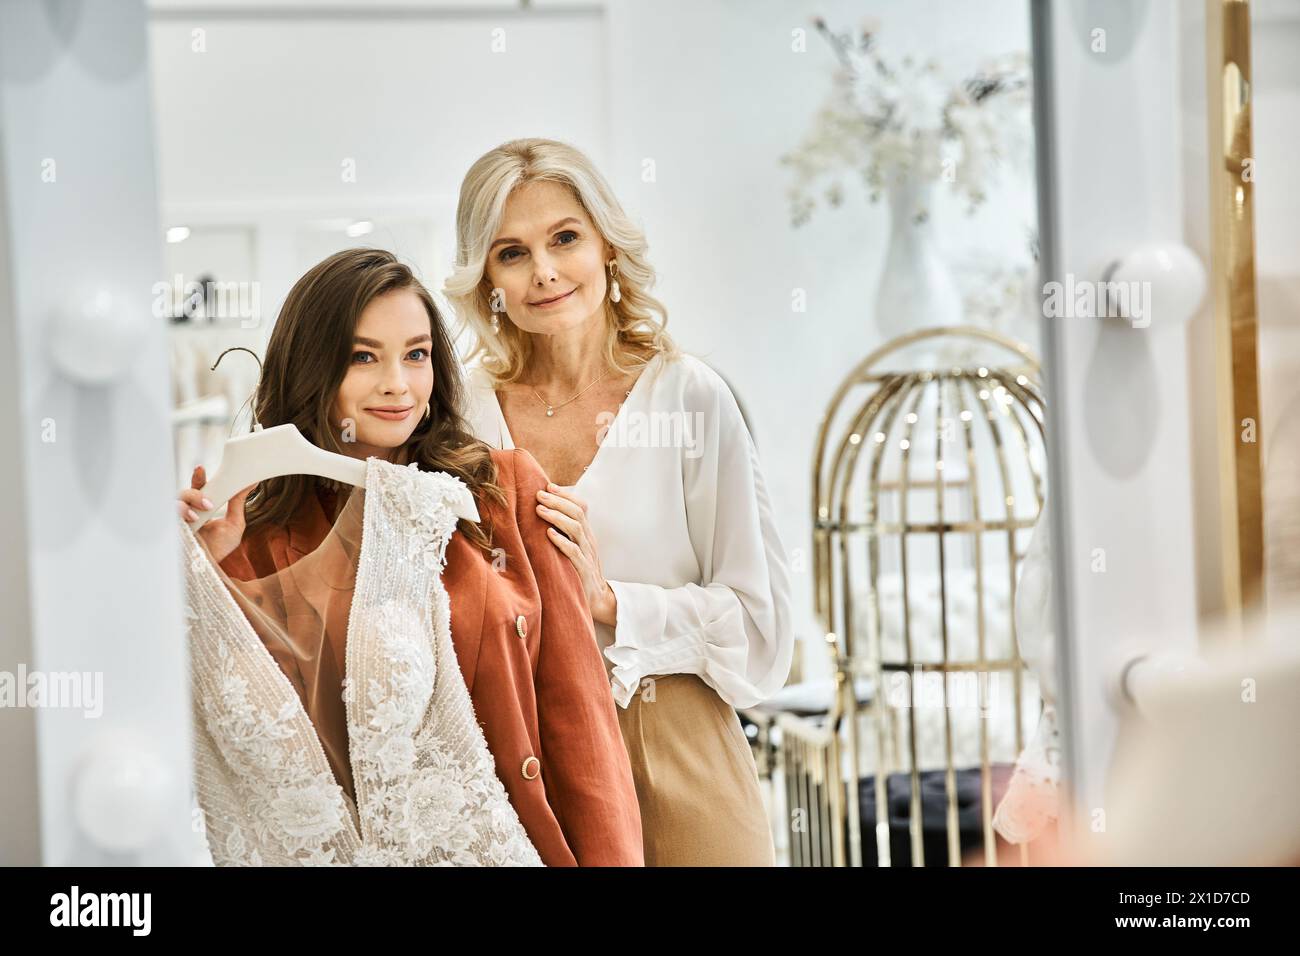 A young beautiful bride and her mother stand together in a room, immersed in wedding shopping preparations. Stock Photo